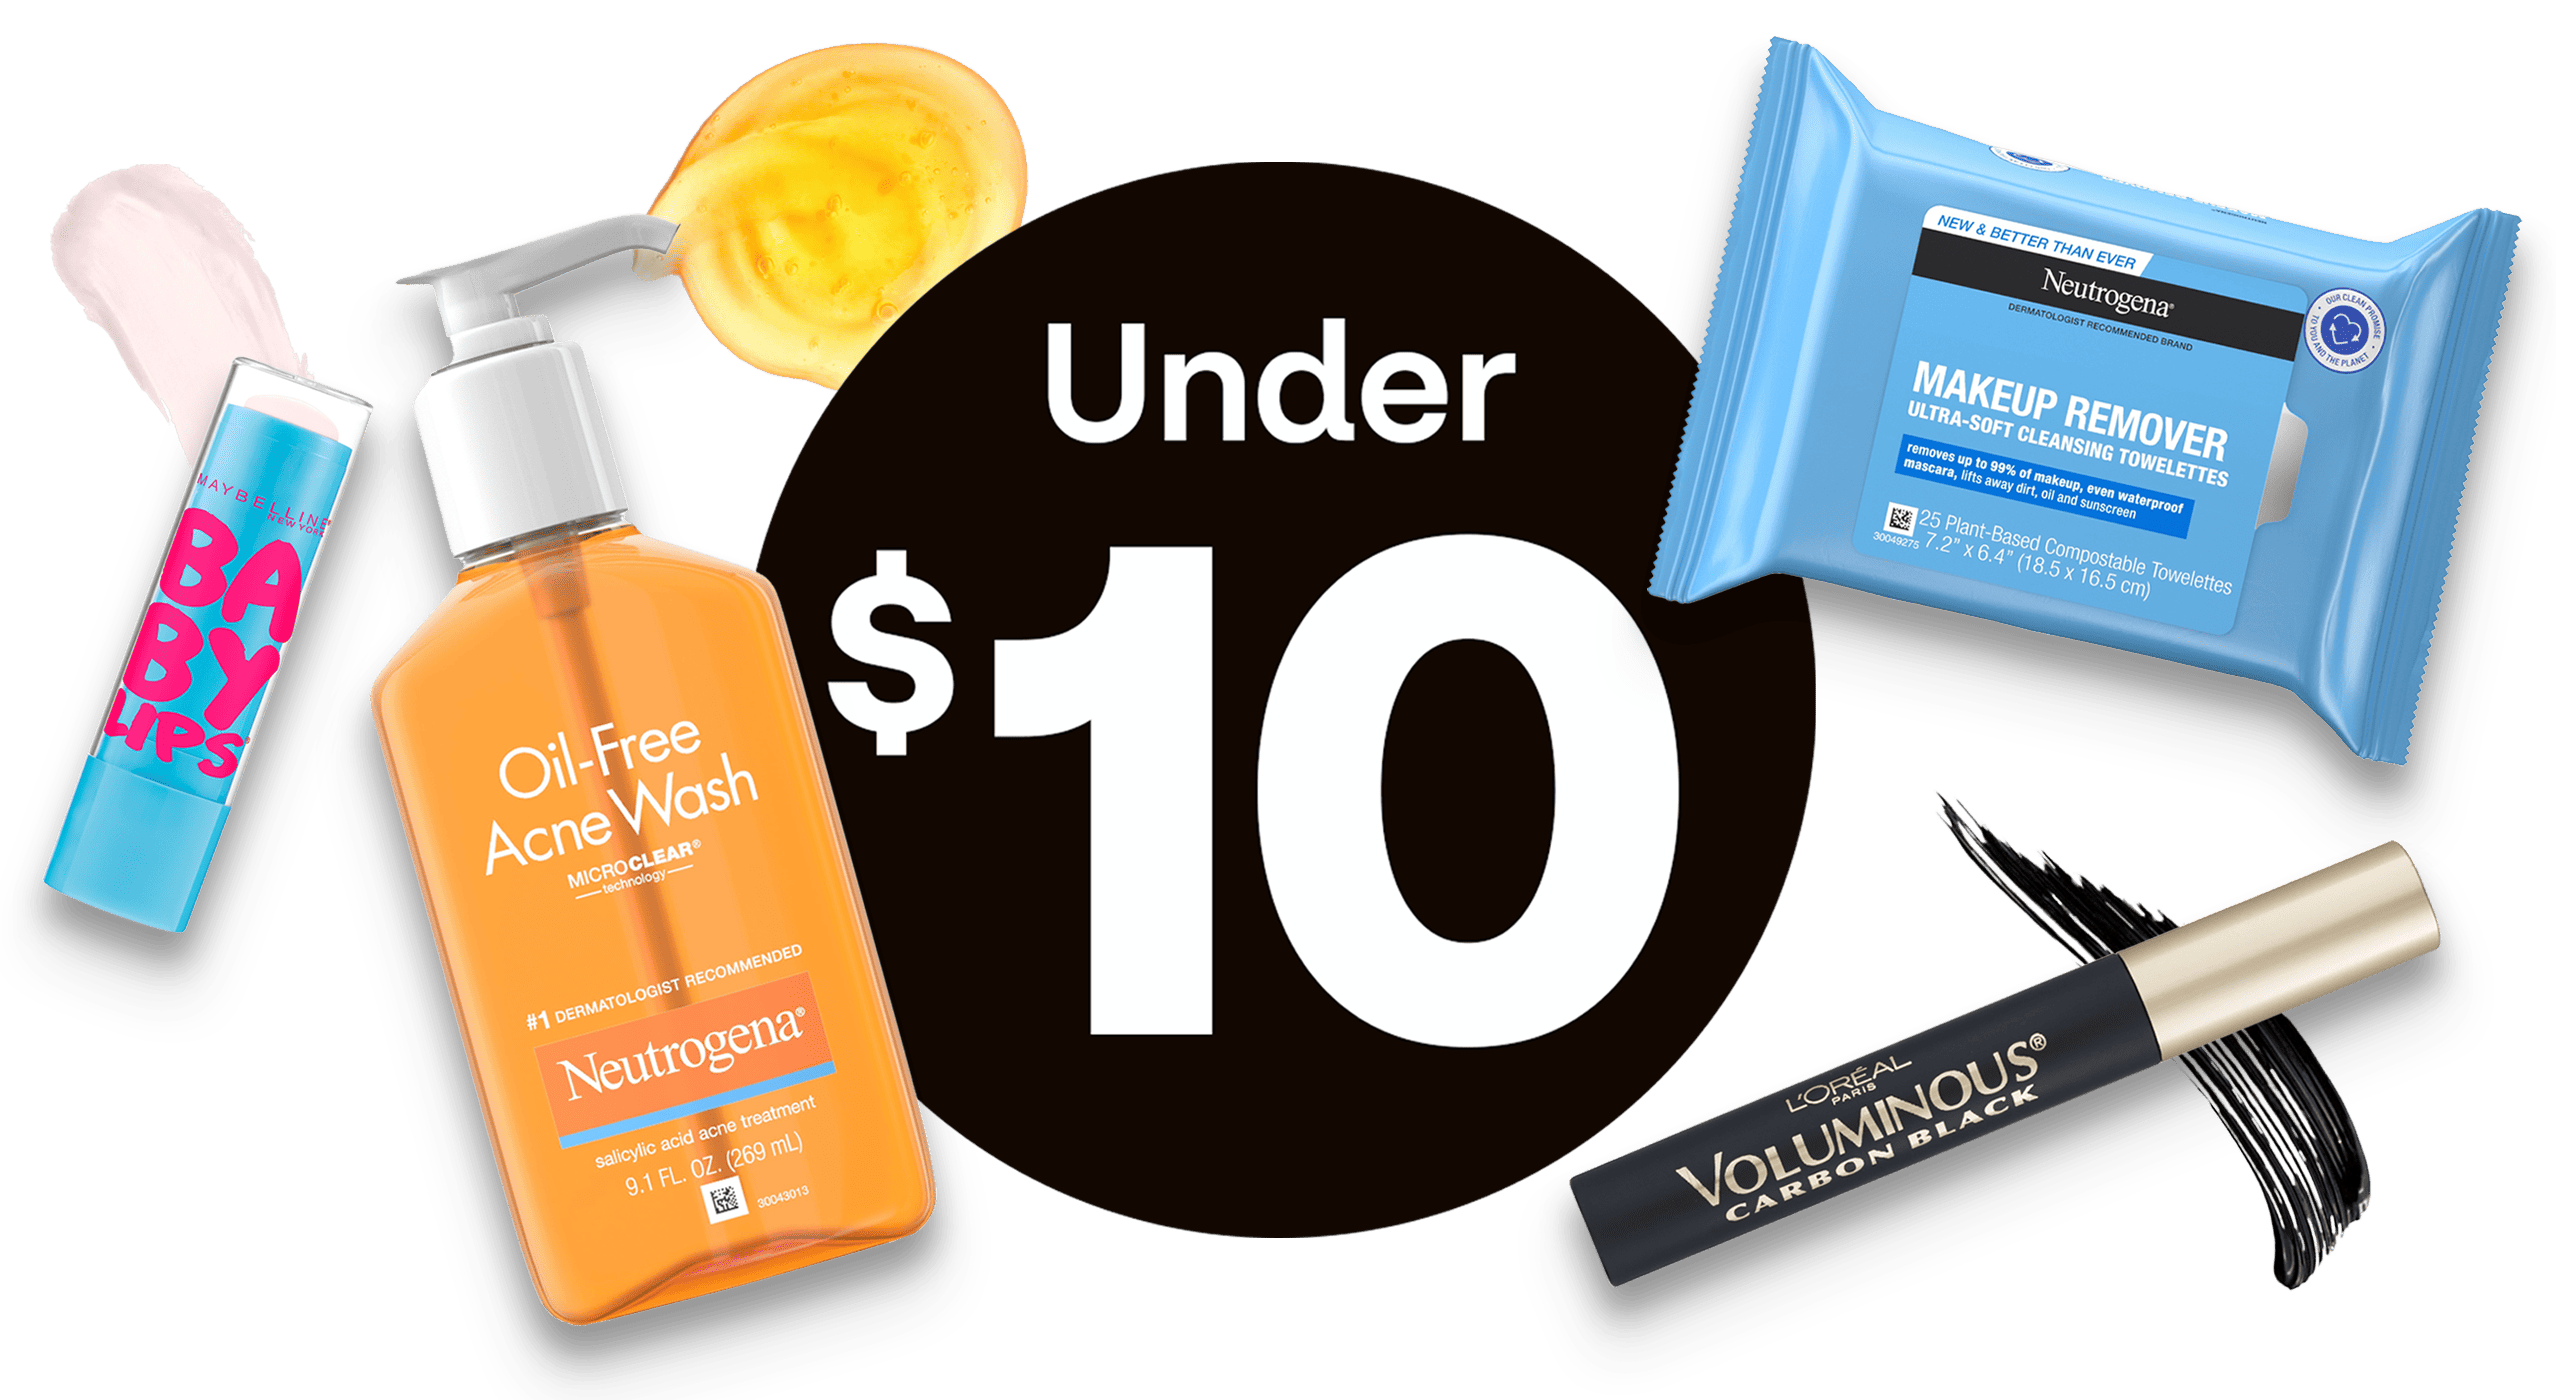 Under $10 beauty products